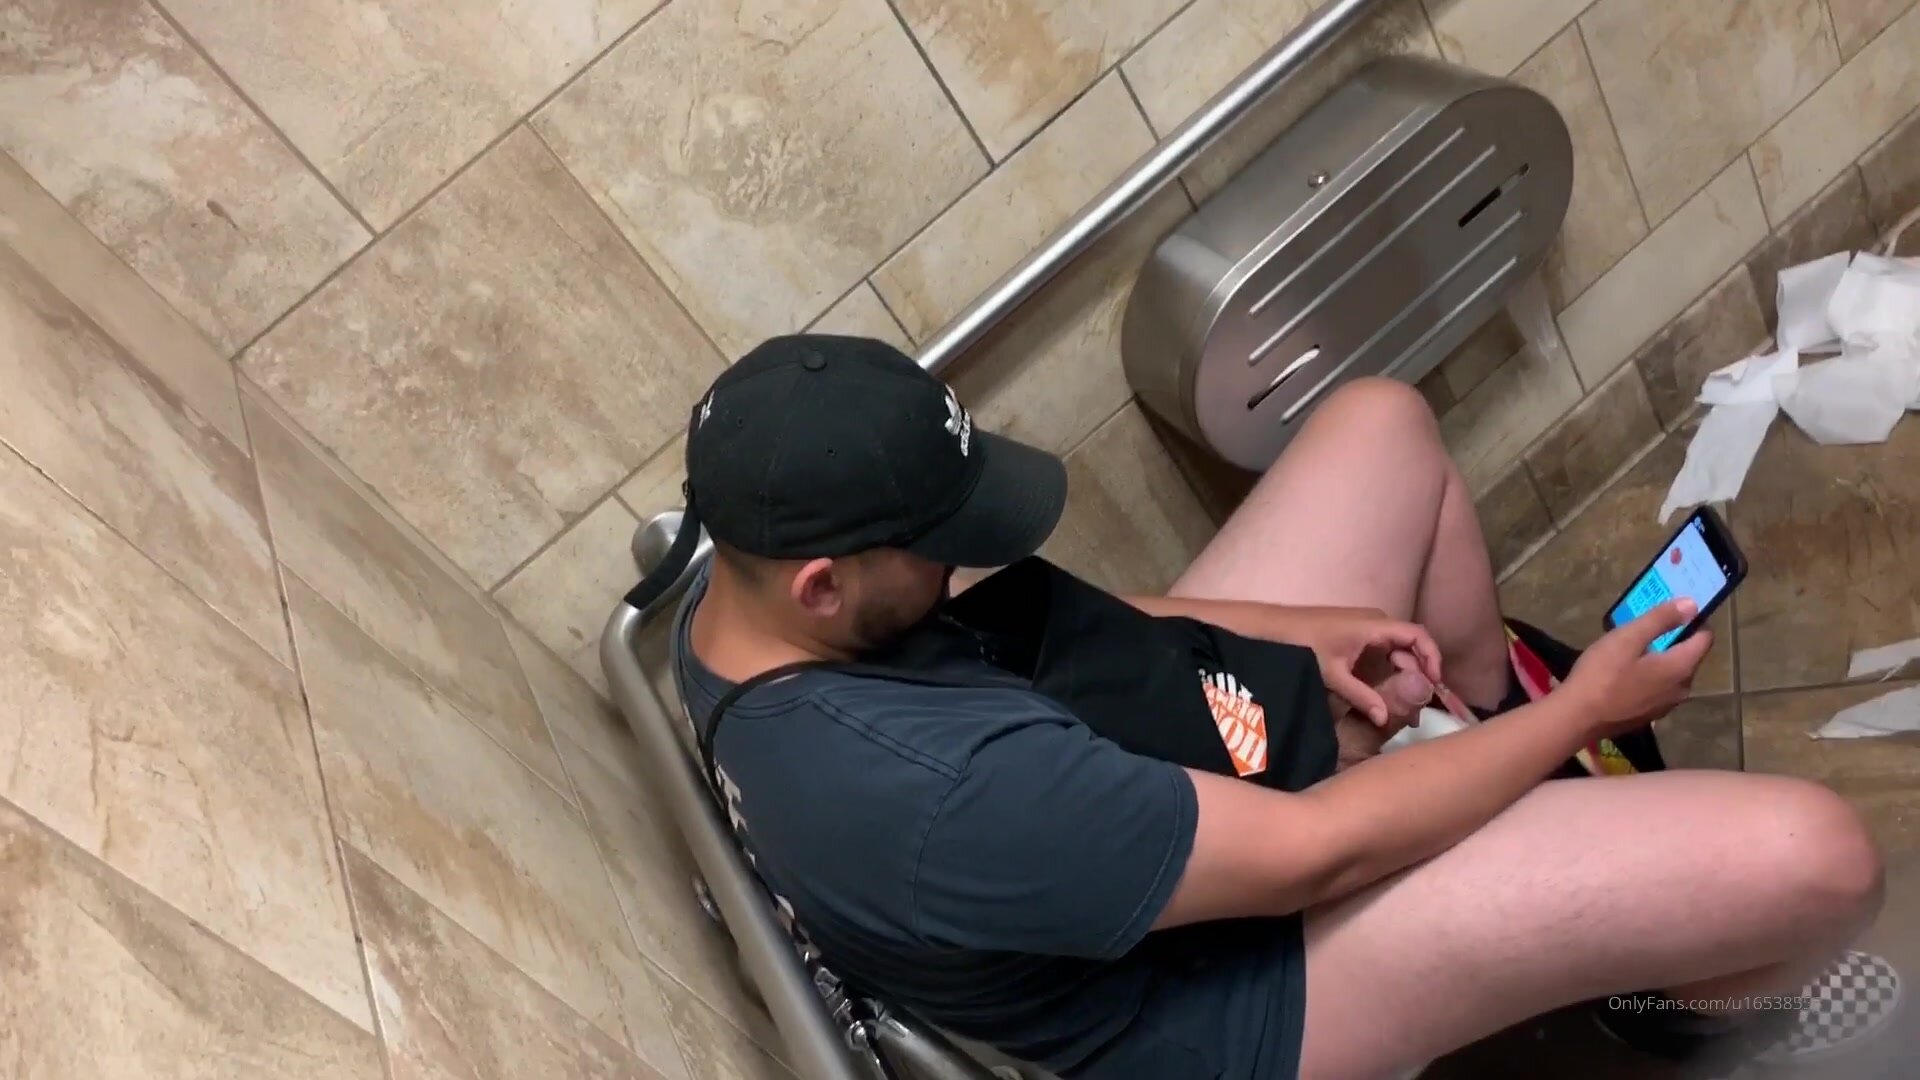 Toilet Spy | Hot, hung and playing with his cock